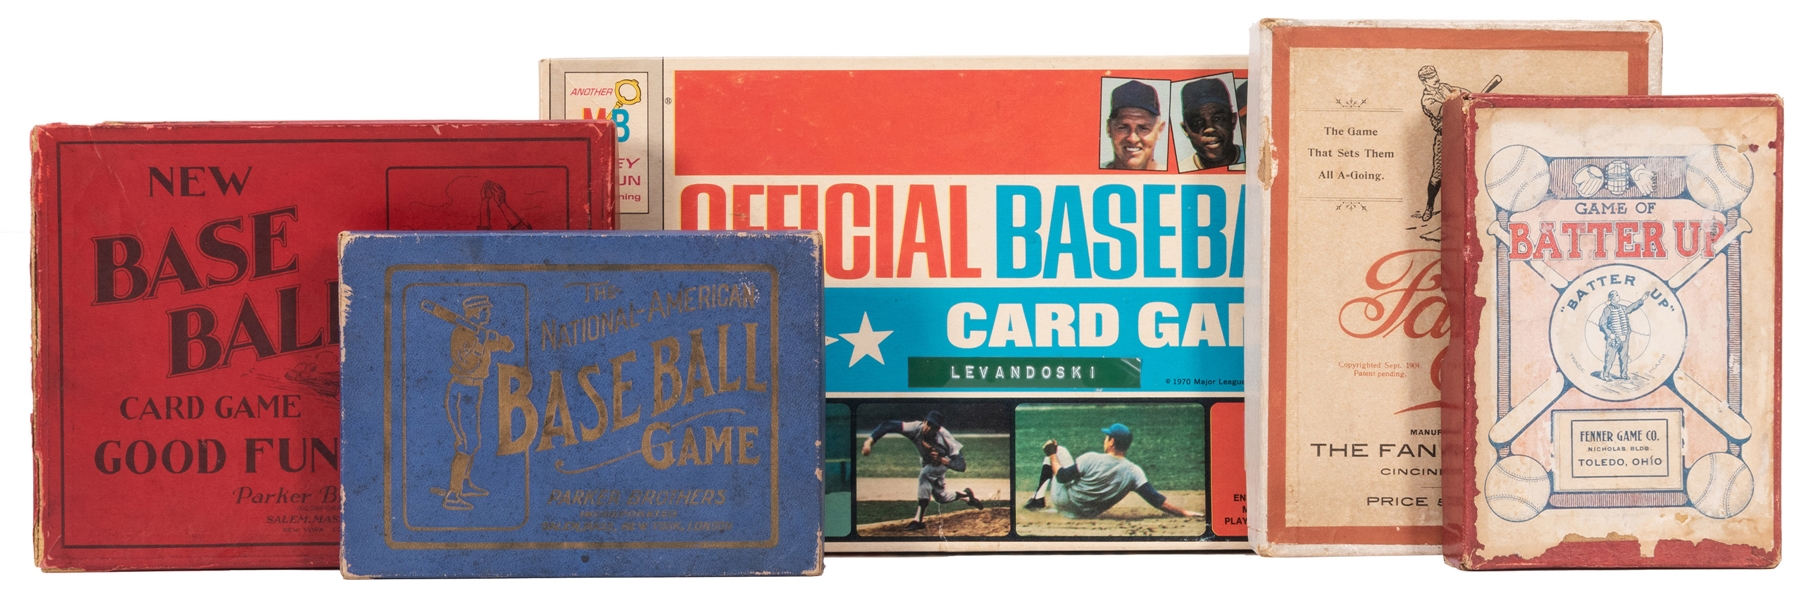  Group of Six Early Baseball Card Games. Includes both The N...